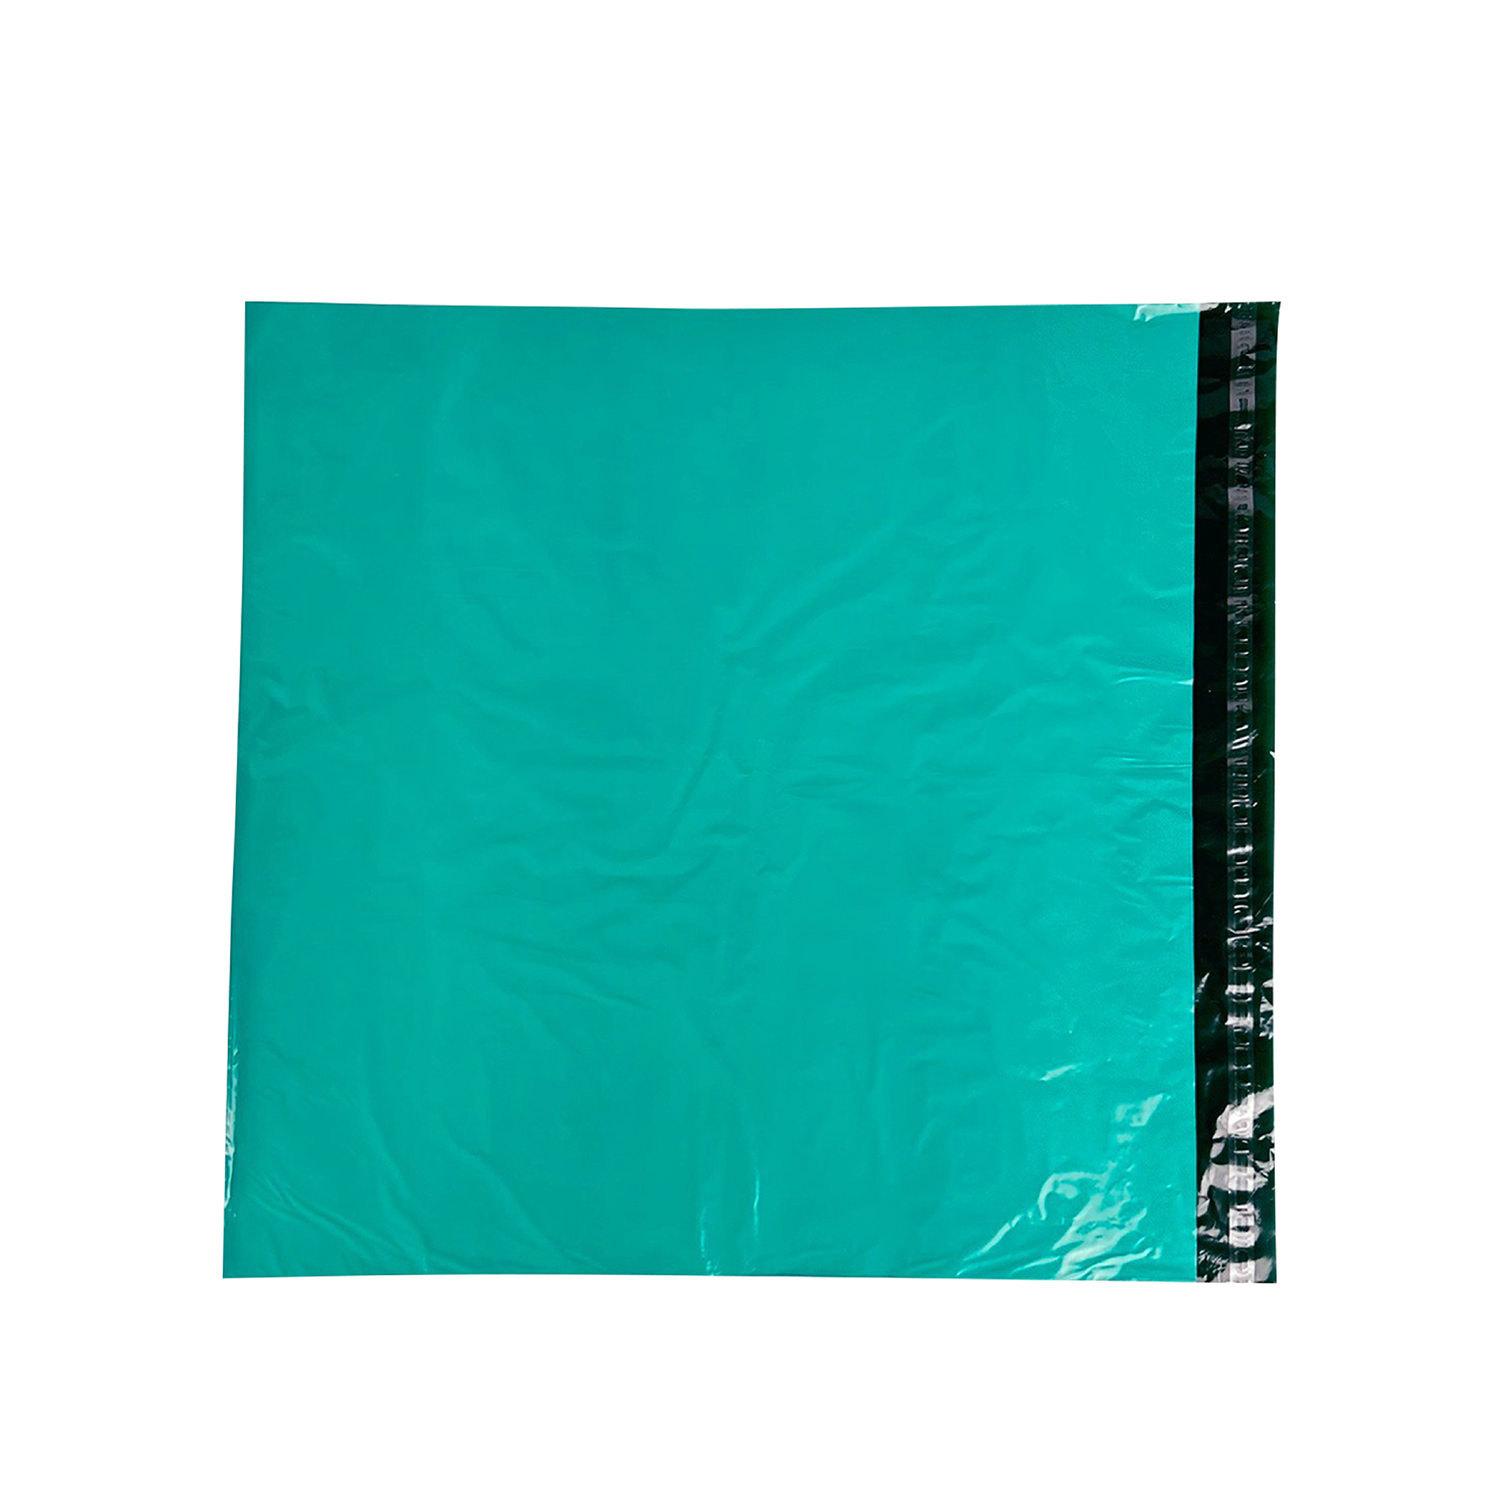 Owlpack Eco Friendly Recycled Mailers( Teal, Size 12x15.5, 24x24)